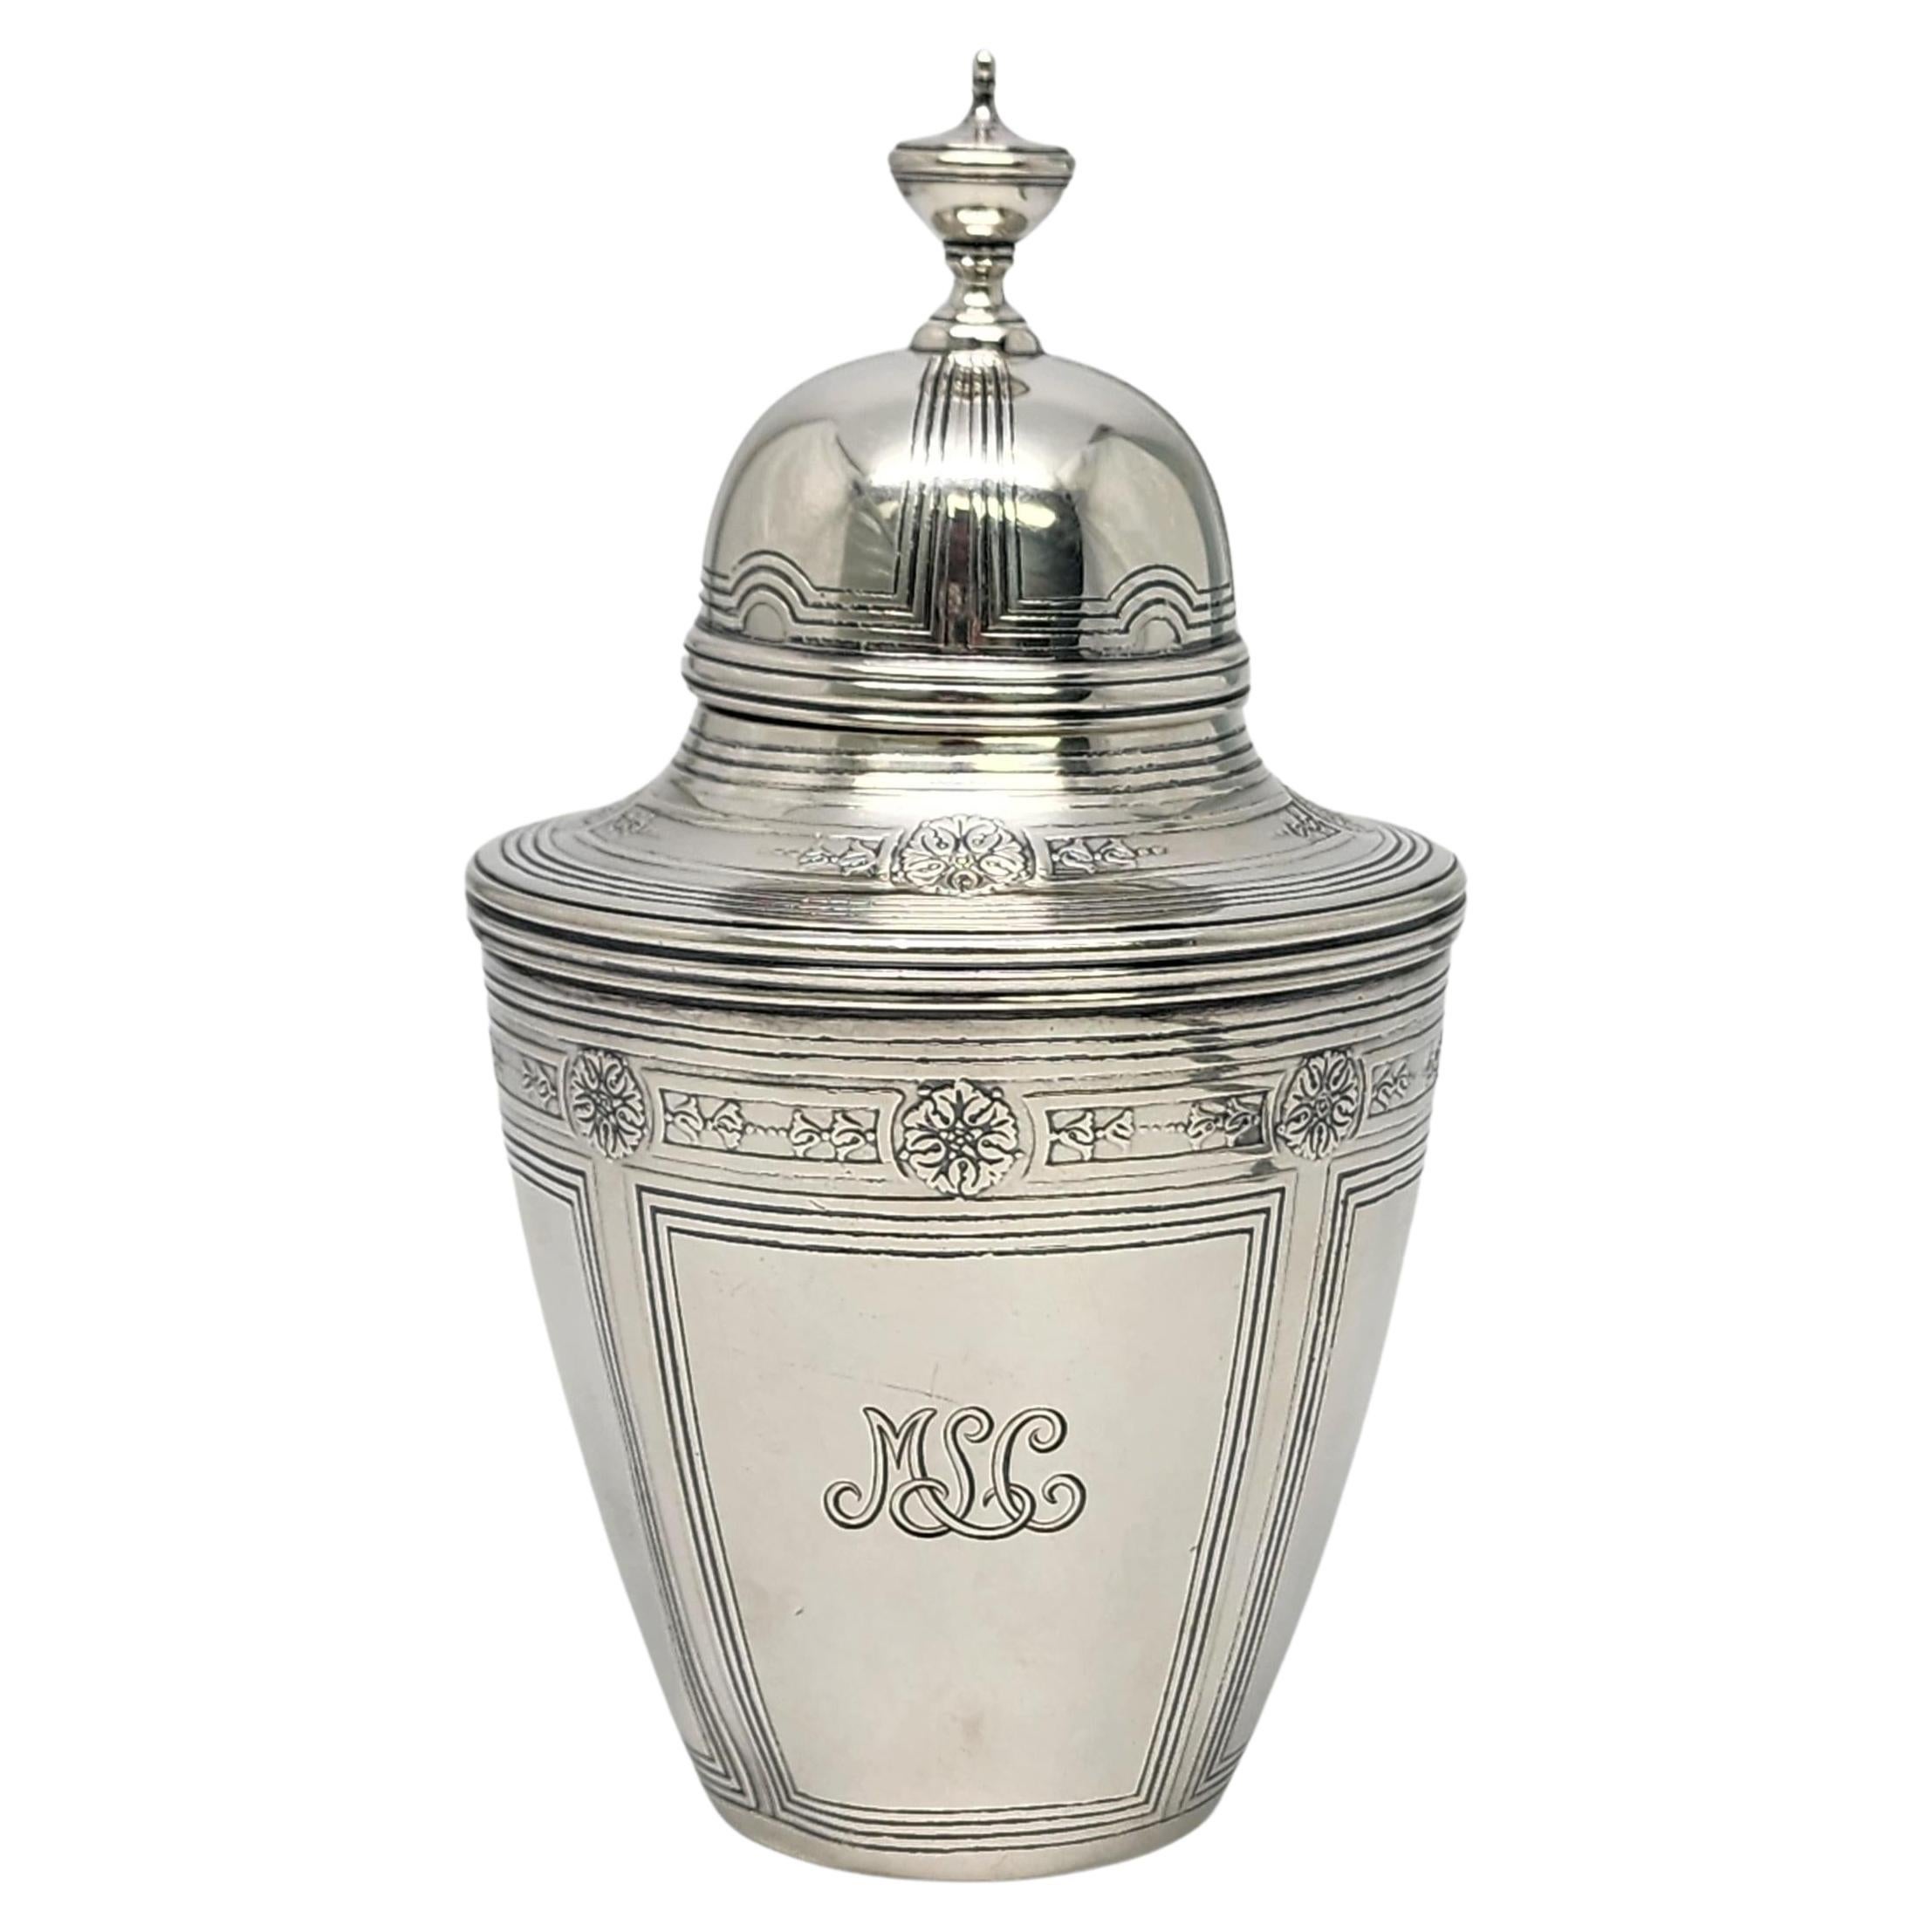 Tiffany & Co Sterling Silver Tea Caddy with Monogram #16850 For Sale